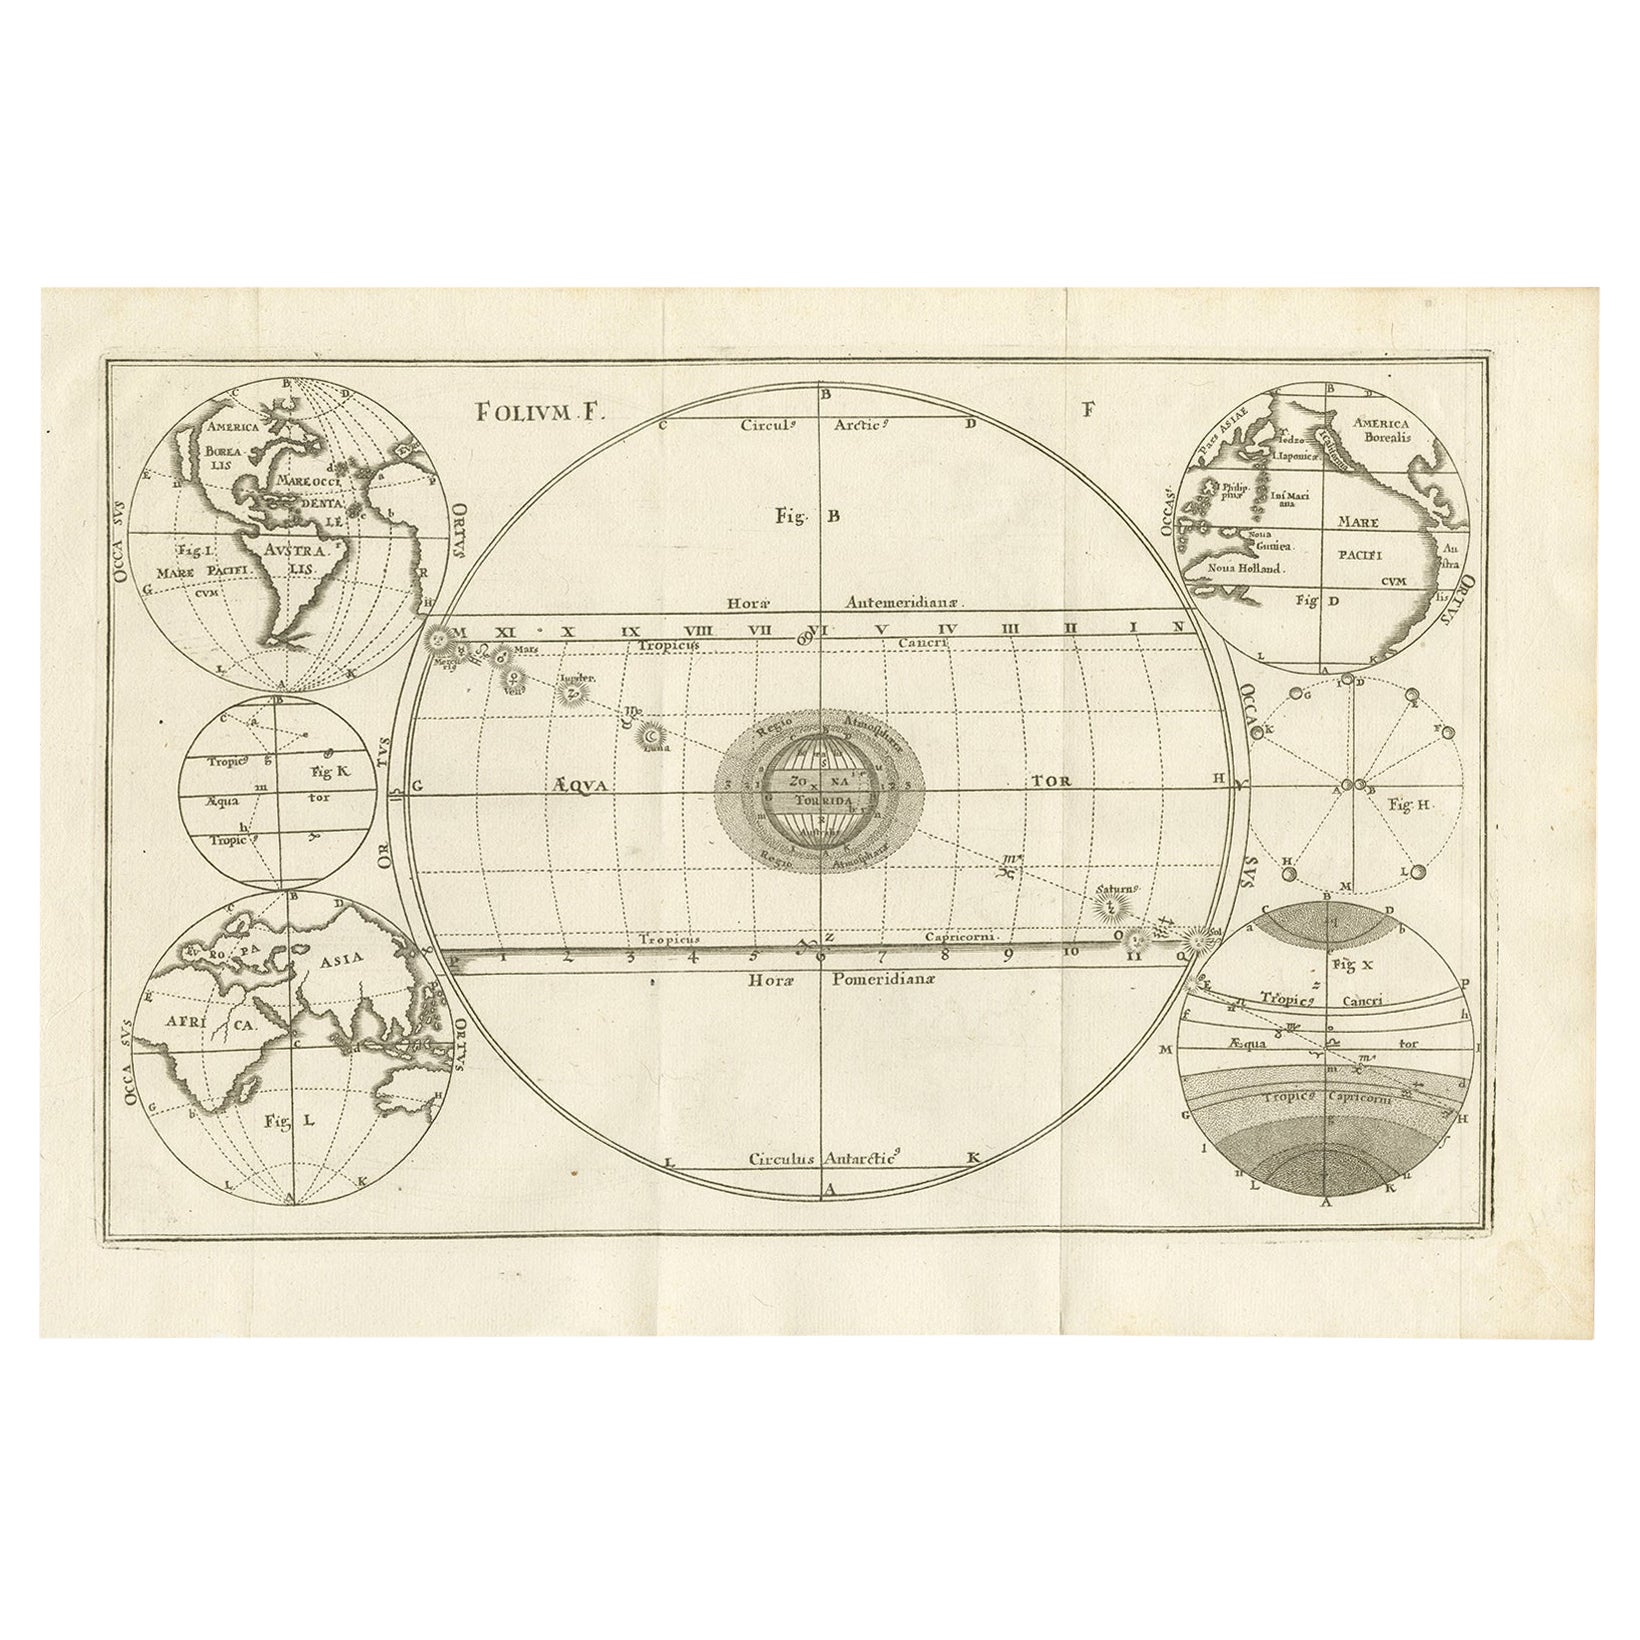 Unique Antique Projection of the World with Twice California as an Island, c1703